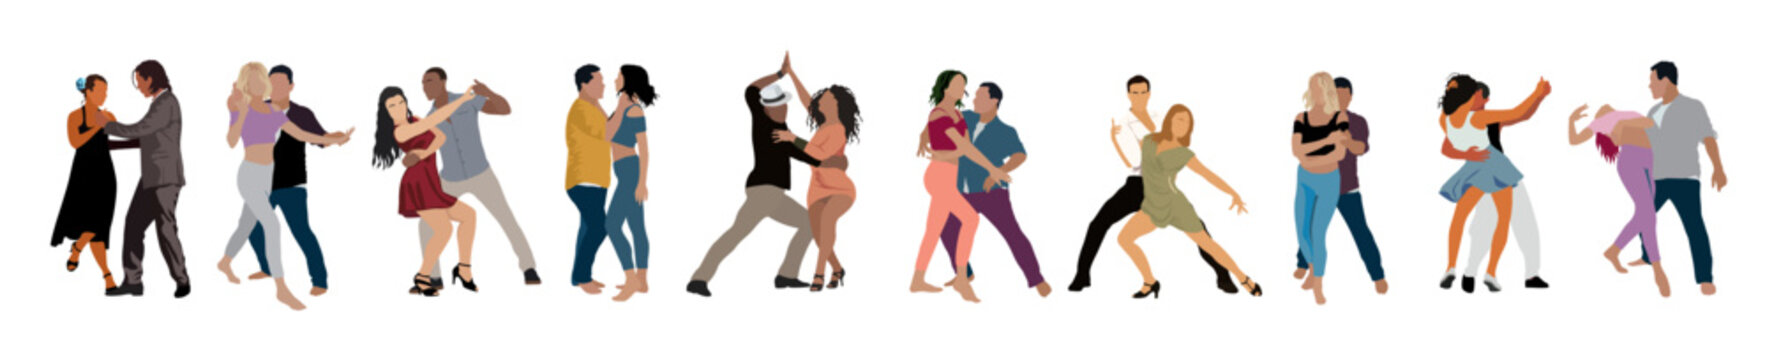 Dancing People, Dancer Bachata, Salsa, Lambada, Tango, Latina Dance. Set of couple people in different dance poses. Cartoon style flat vector realistic illustrations isolated on white background.